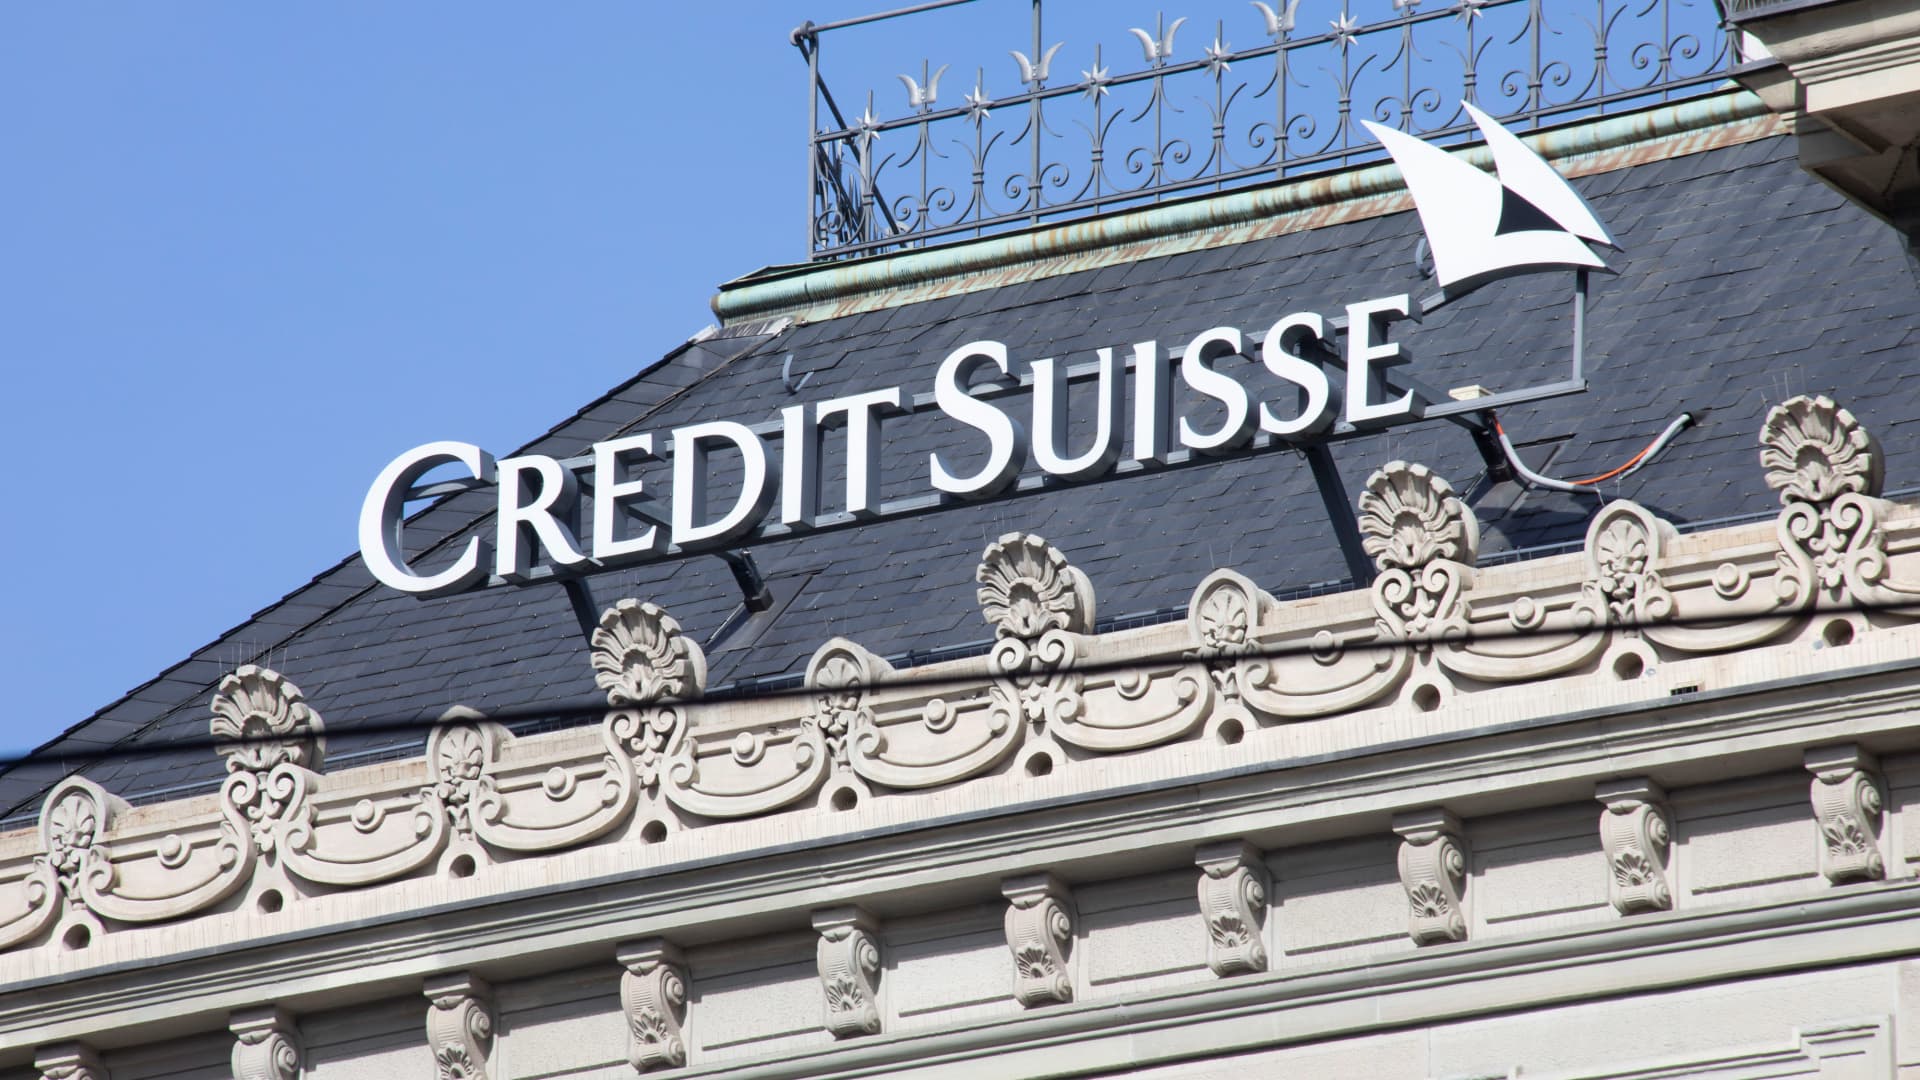 UBS buys Credit Suisse for $3.2 billion as regulators look to shore up the global banking system